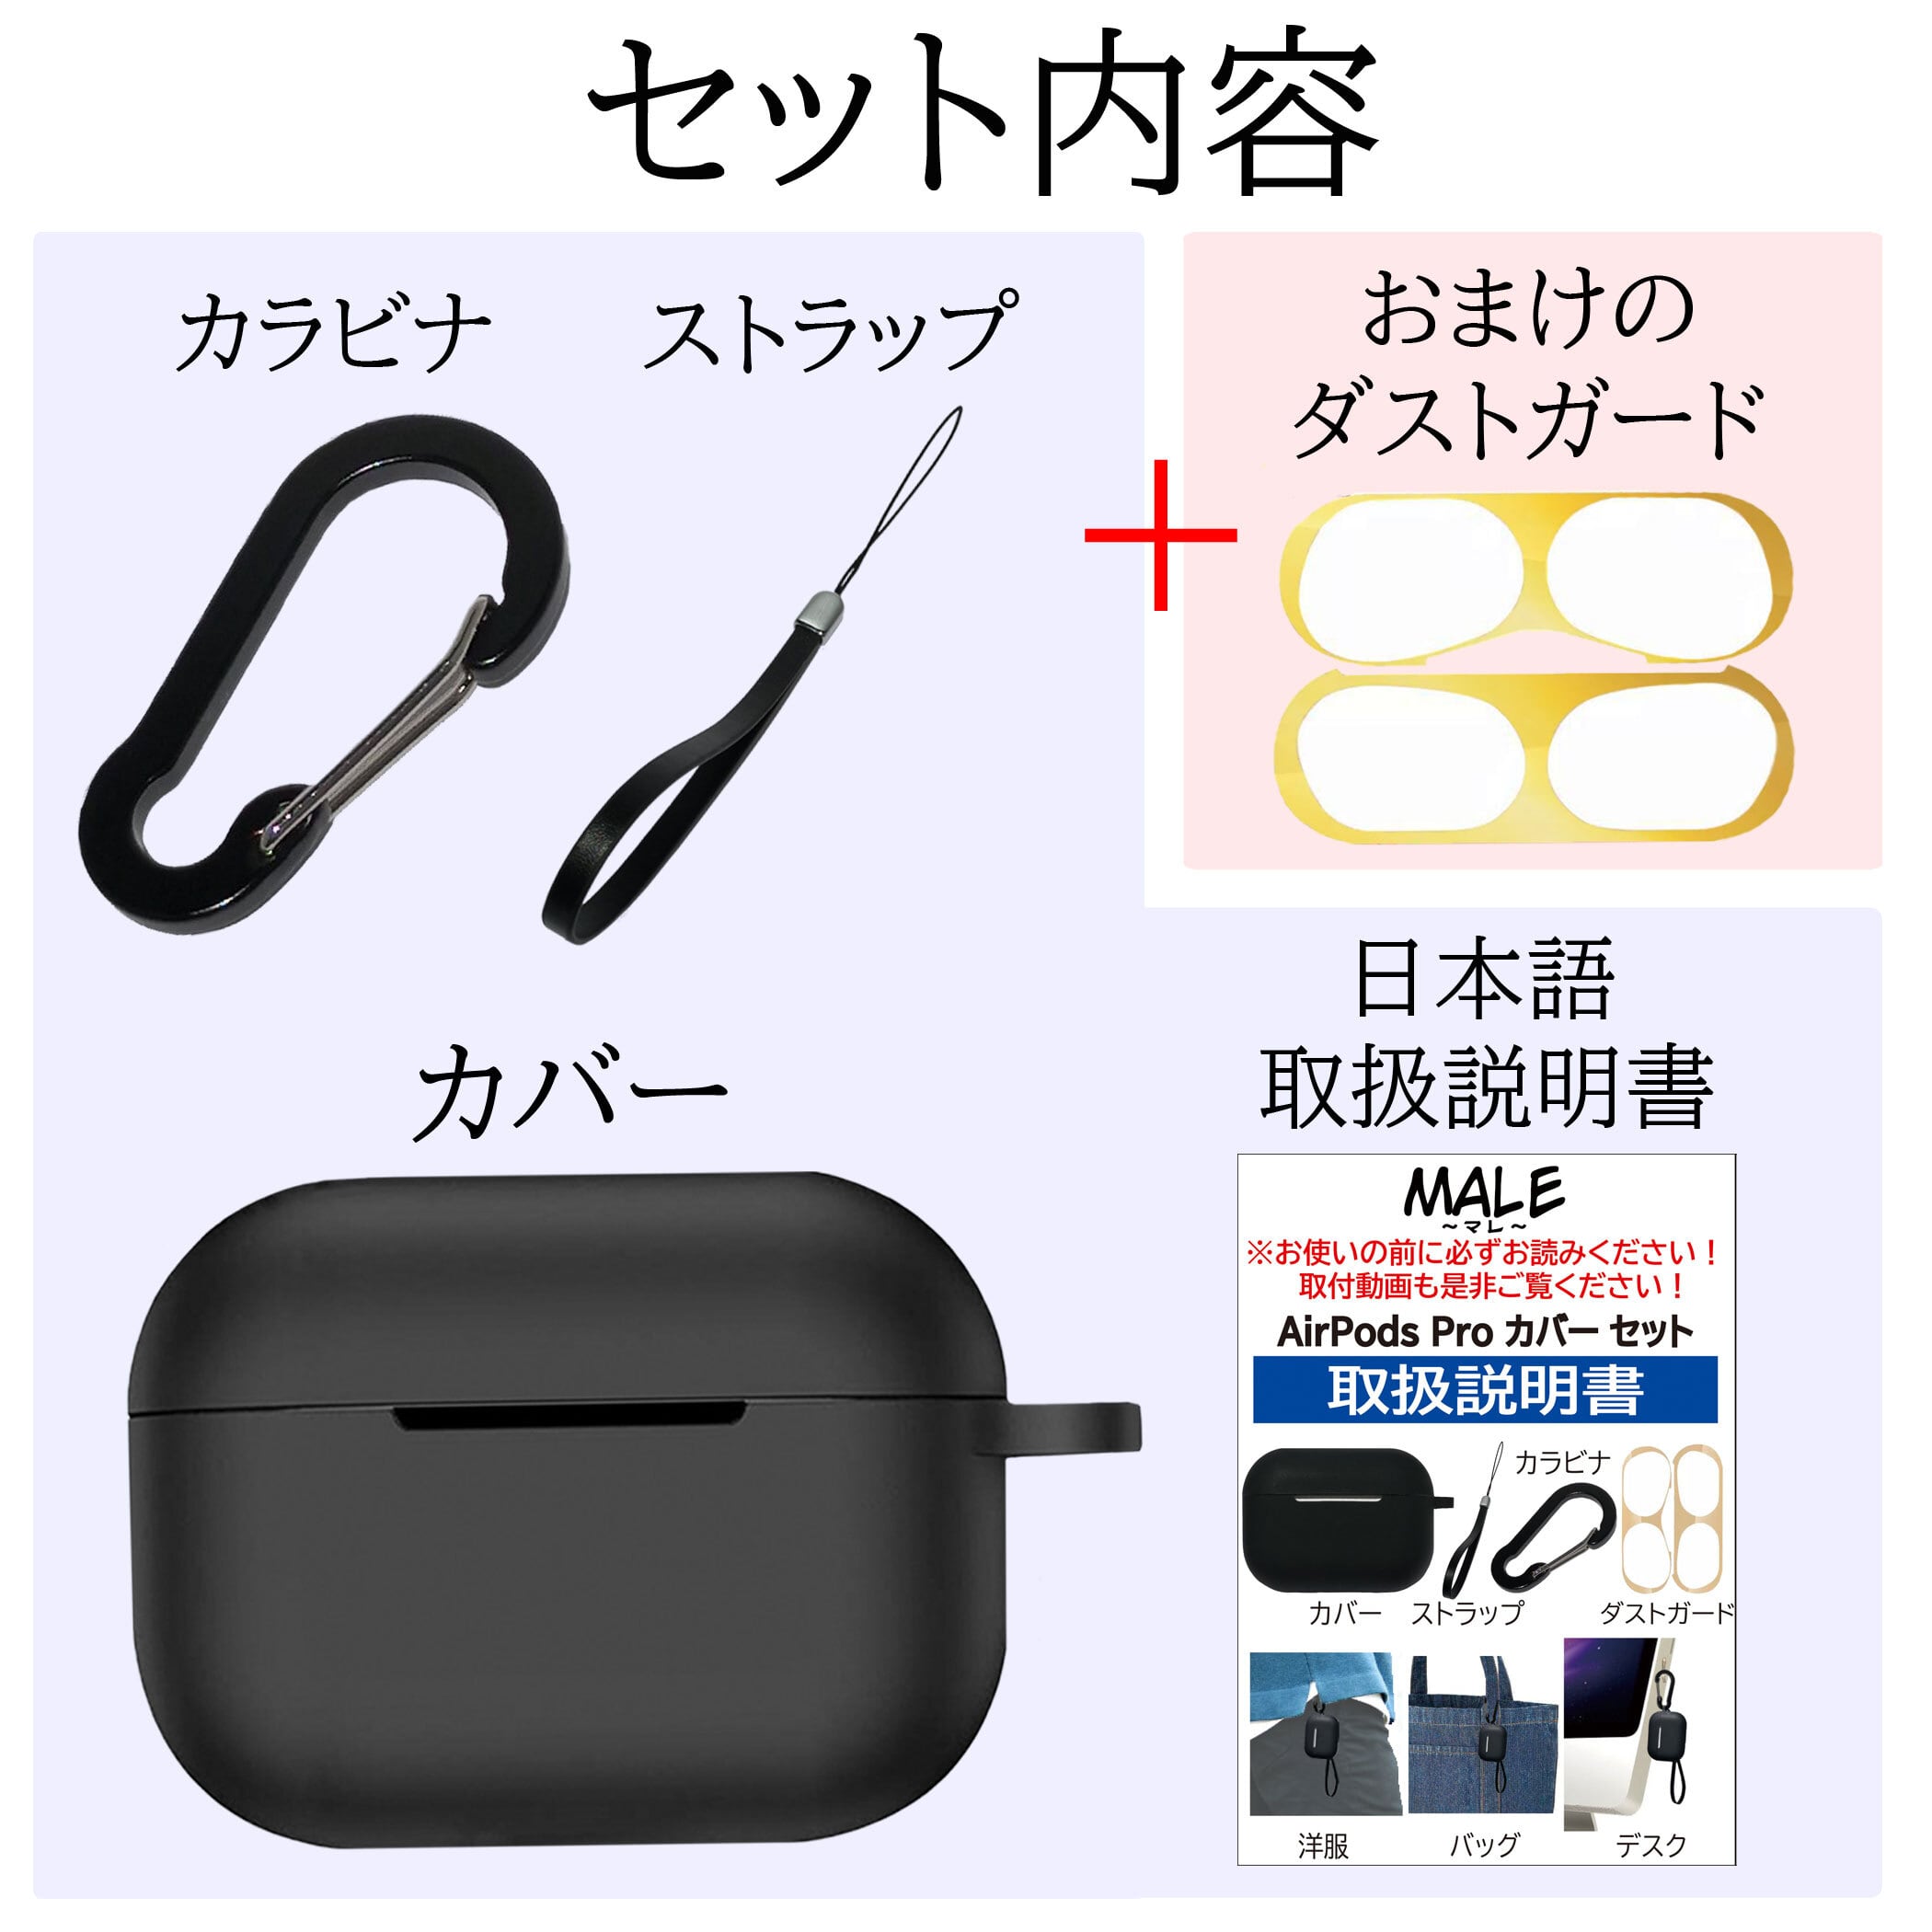 AirPods　③、④、⑦、⑧、⑨　5点セット